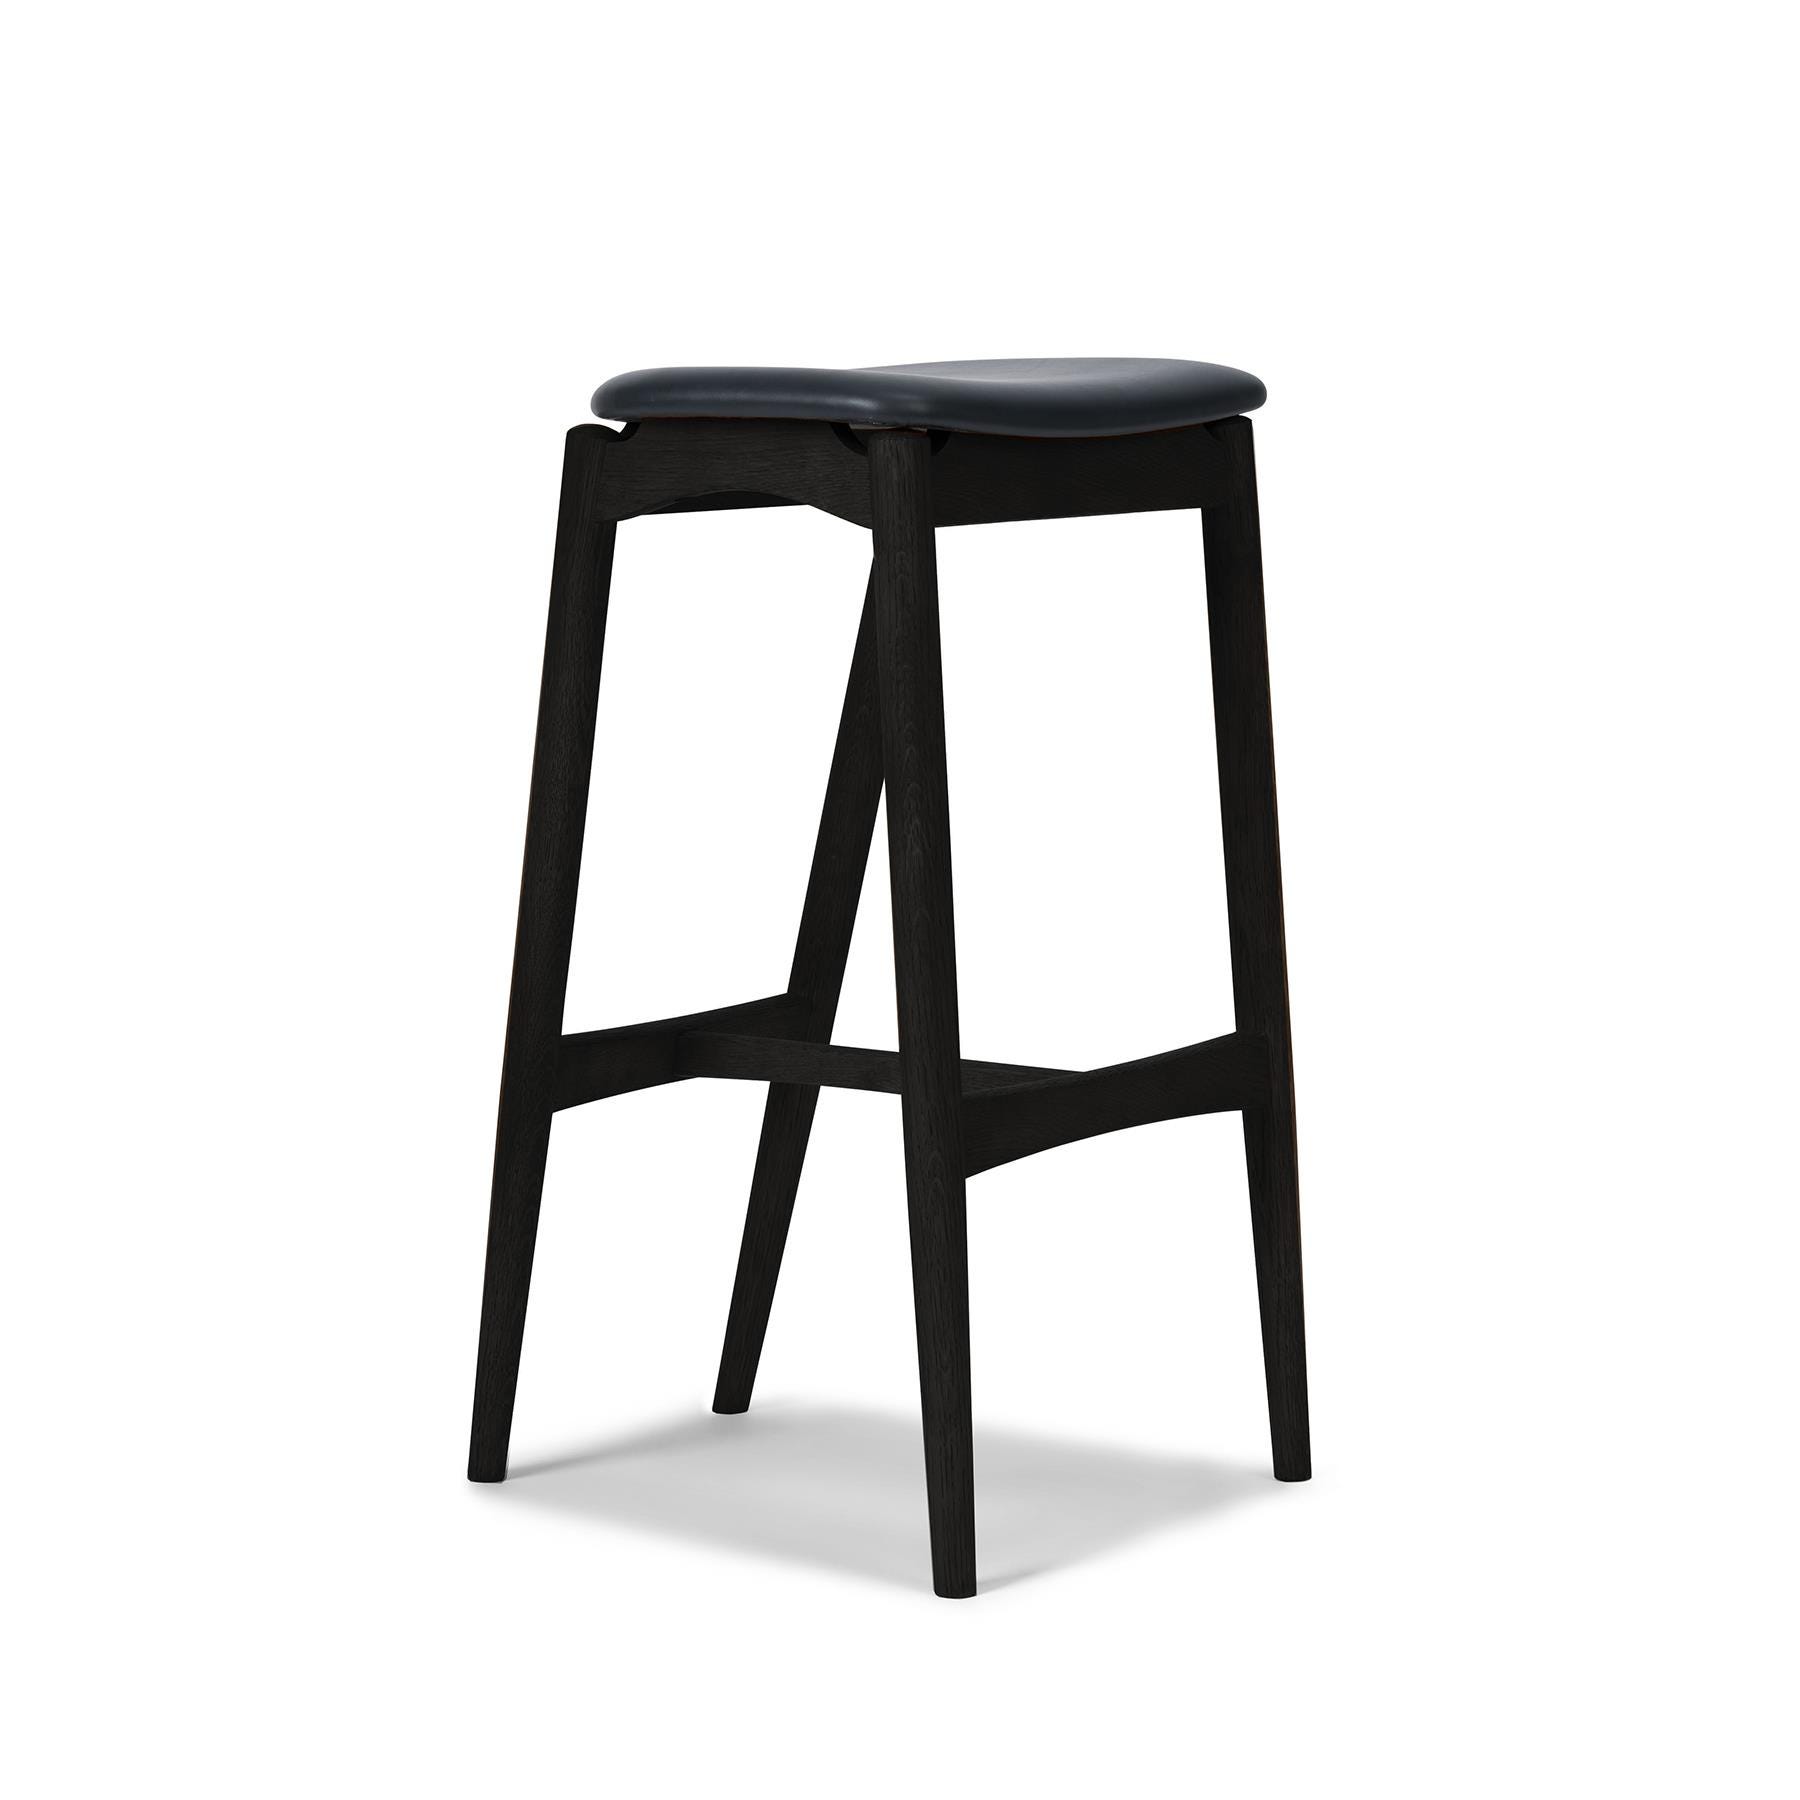 Sibast No 7 Stool Without Back Kitchen Counter Stool Black Oak Dunes Anthracite 21003 Designer Furniture From Holloways Of Ludlow